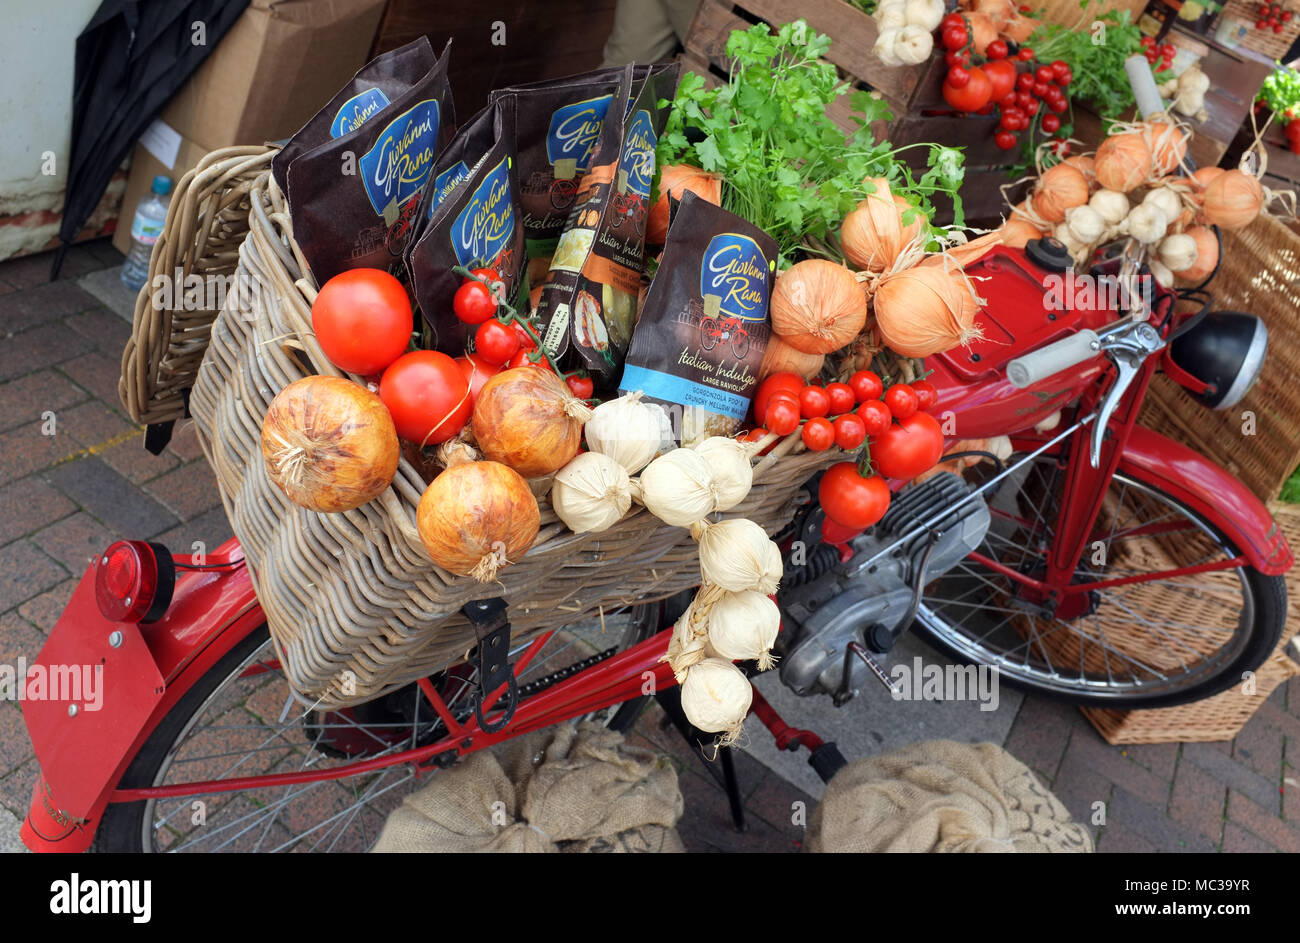 Fruit & Veg display on a vintage motorcycle at a farmers market and food fair stall in England UK Stock Photo